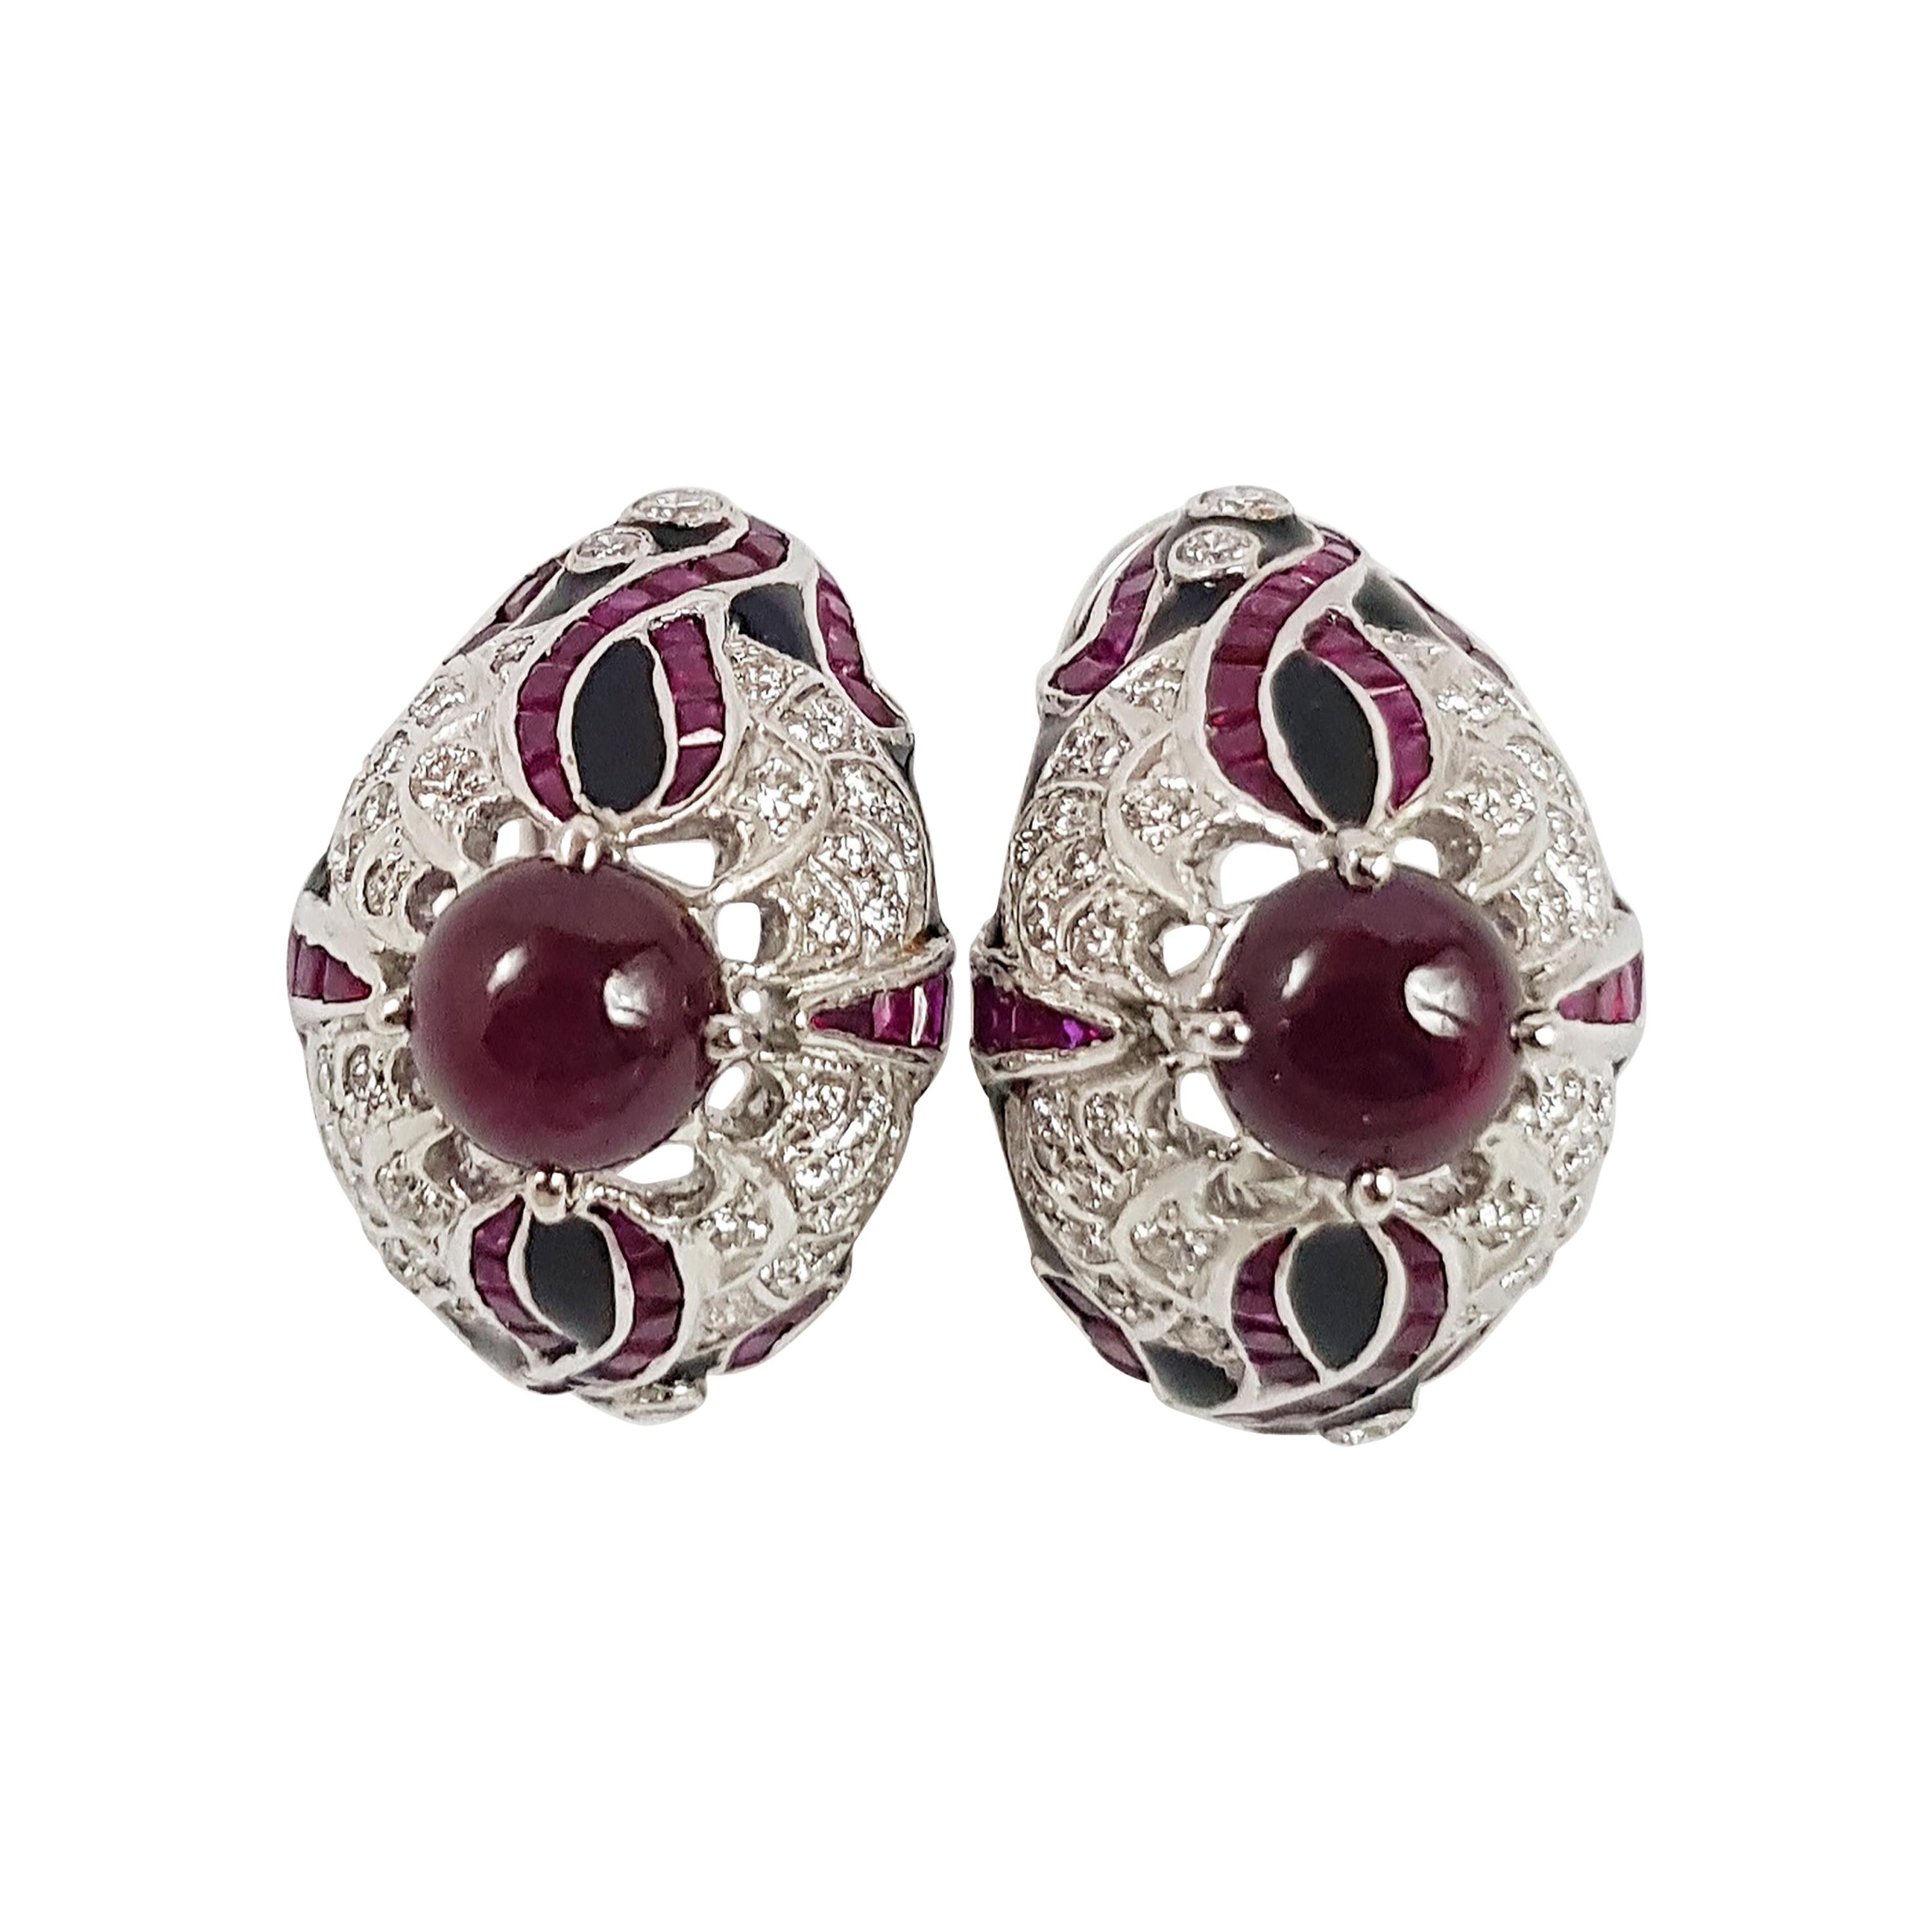 Cabochon Ruby with Ruby and Diamond Earrings Set in 18 Karat White Gold Settings